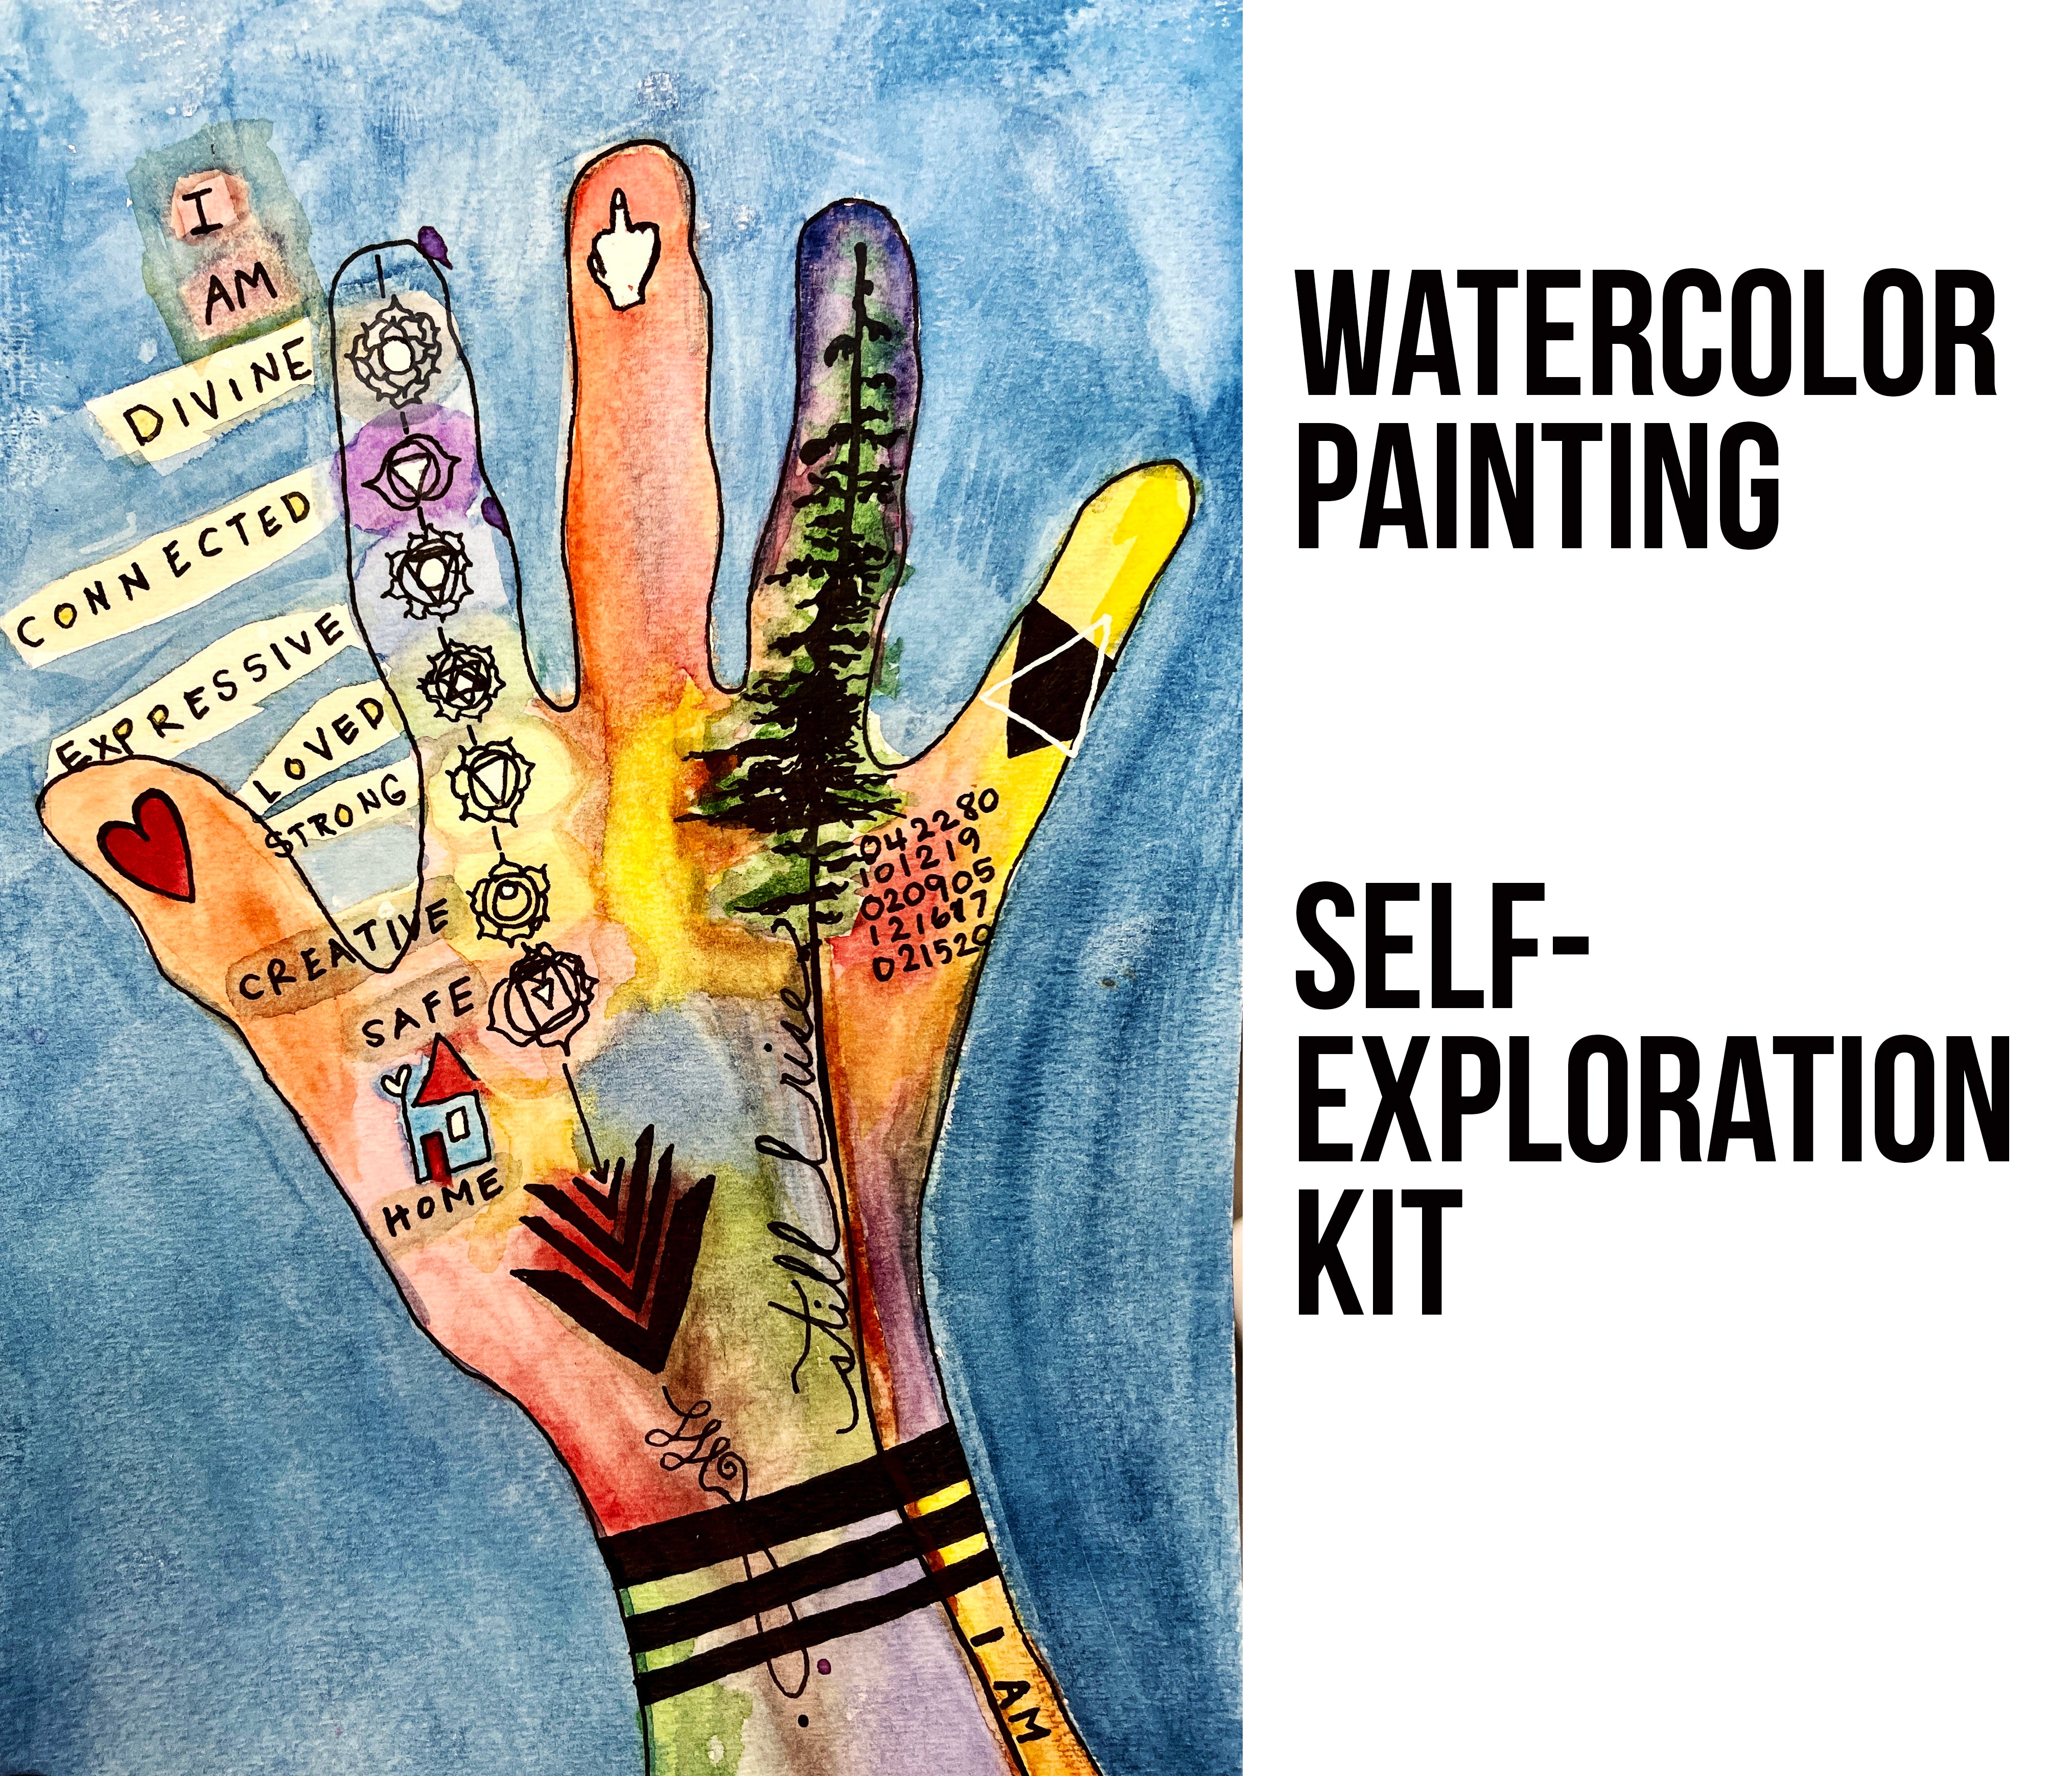 Hand map to self exploration watercolor (meet yourself)